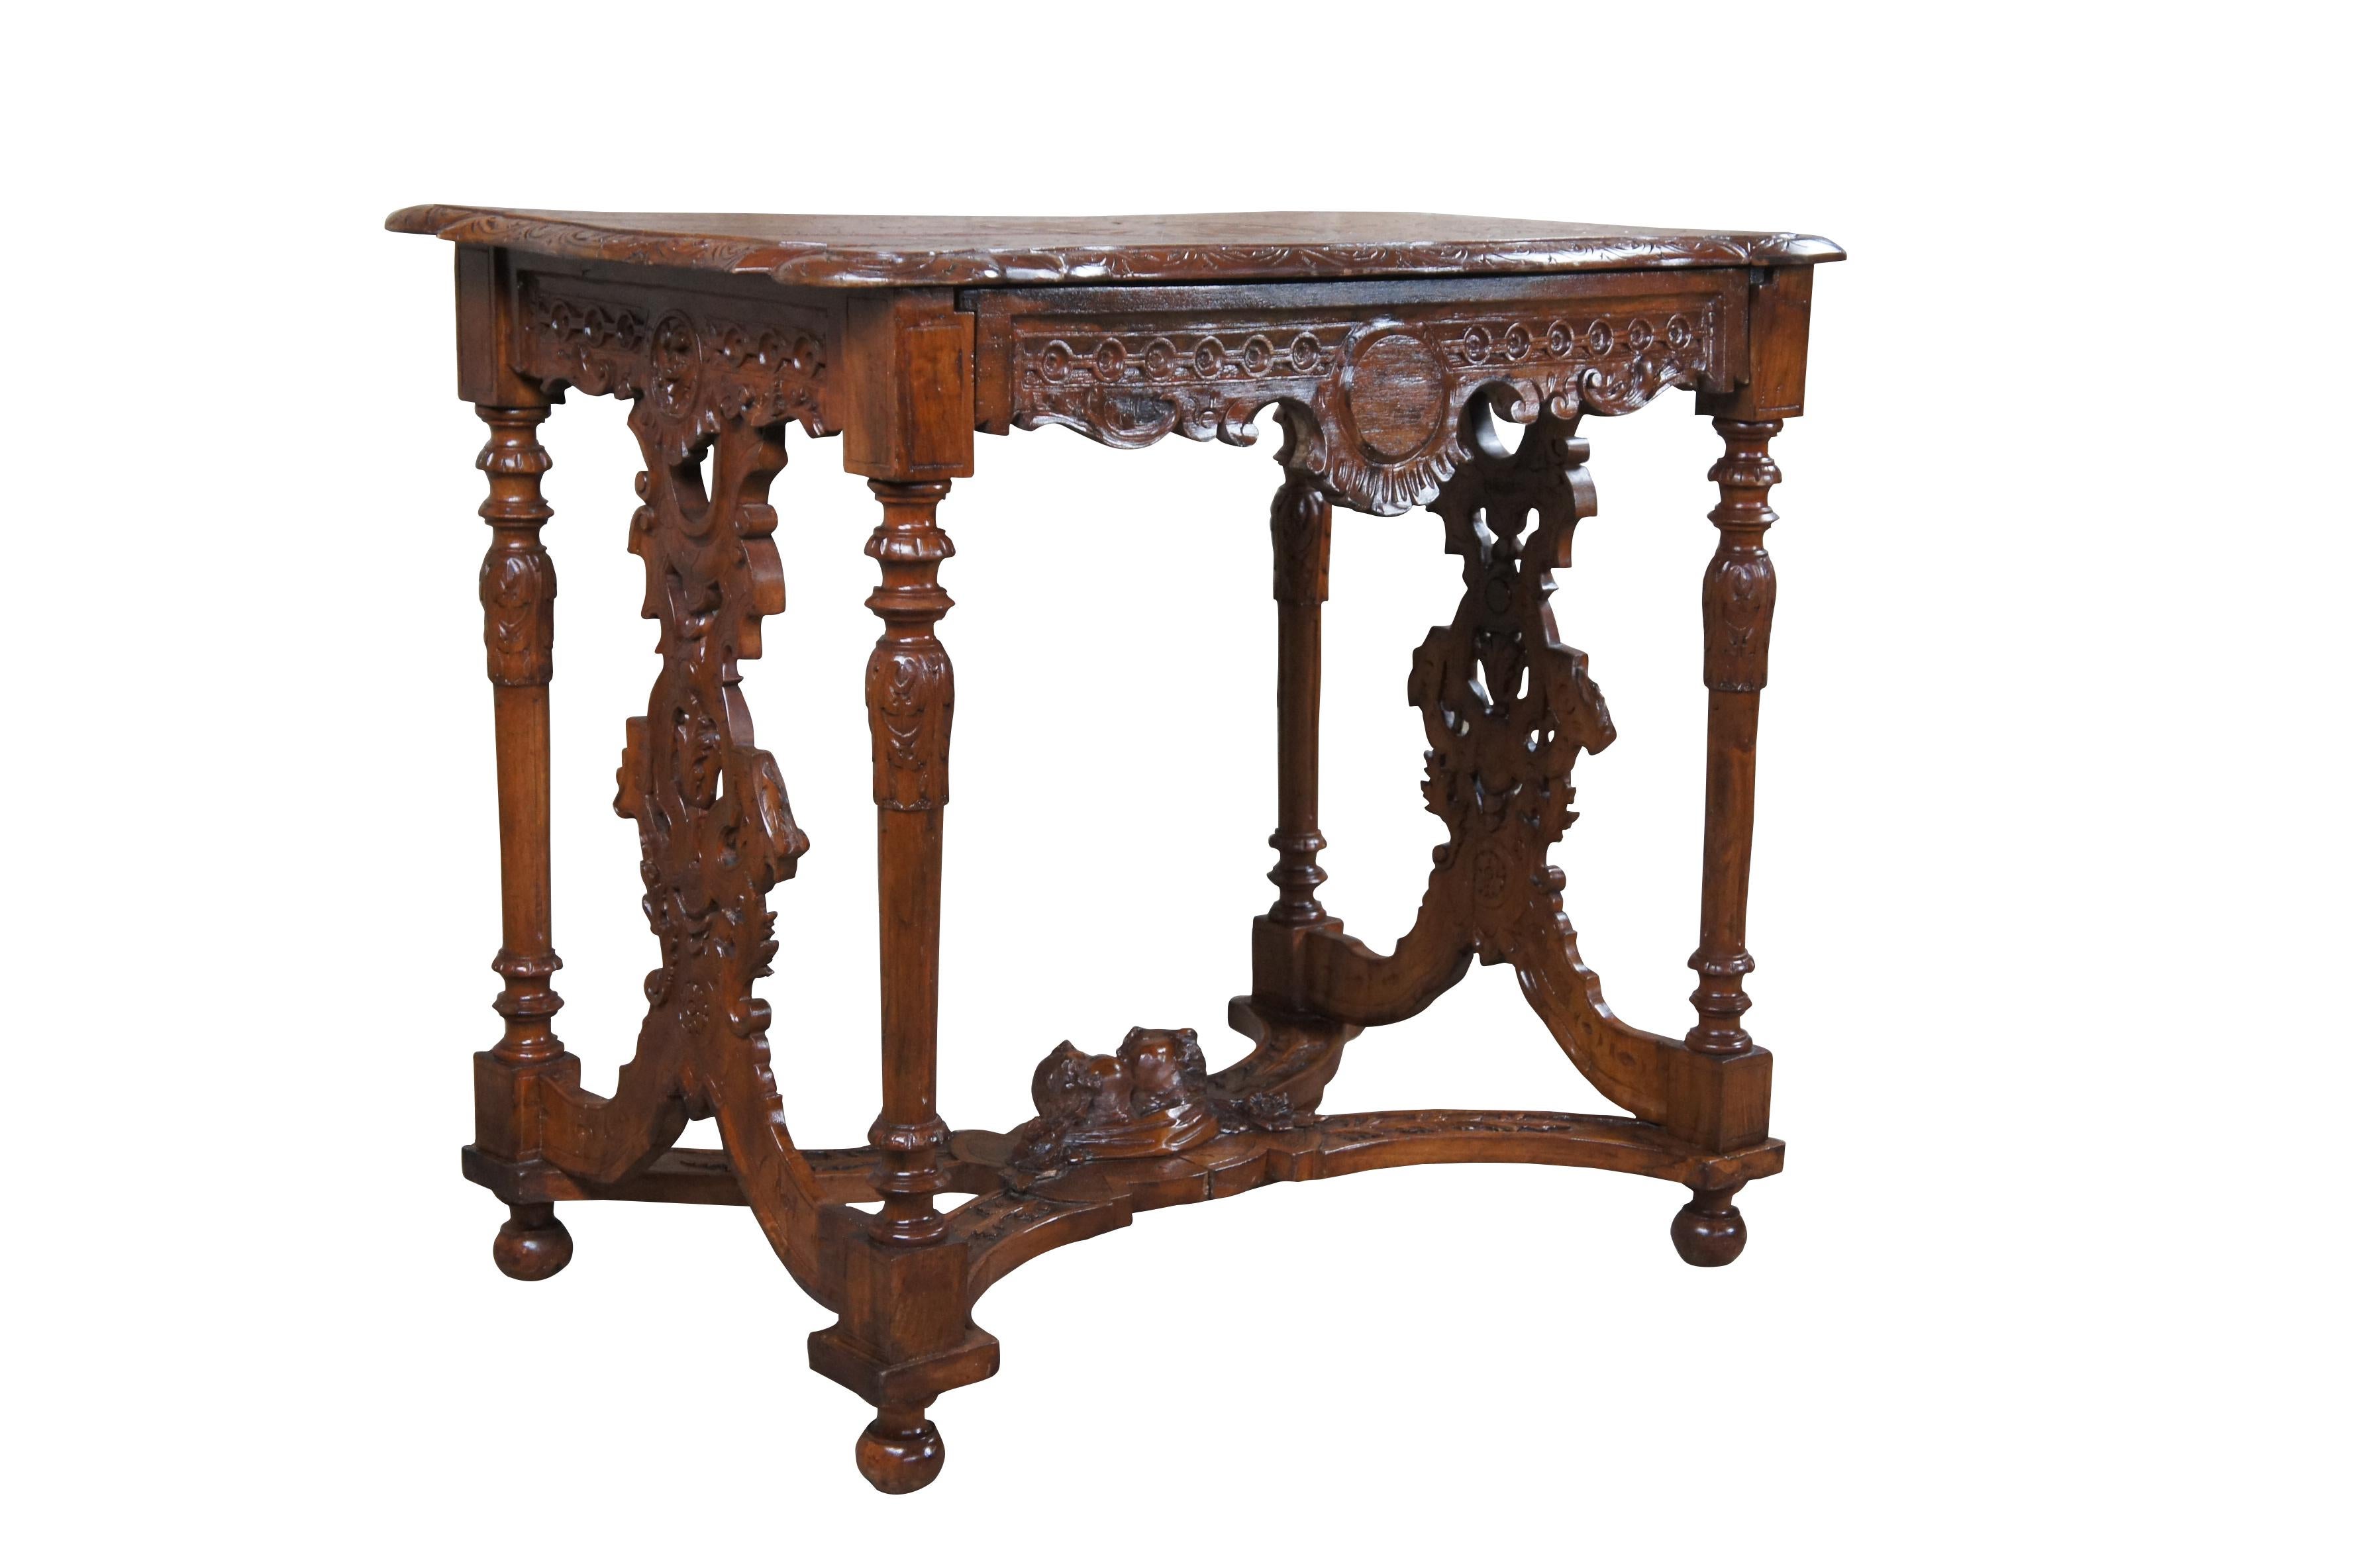 Antique Italian Renaissance Revival Walnut Figural Library Table Writing Desk 52 In Good Condition For Sale In Dayton, OH